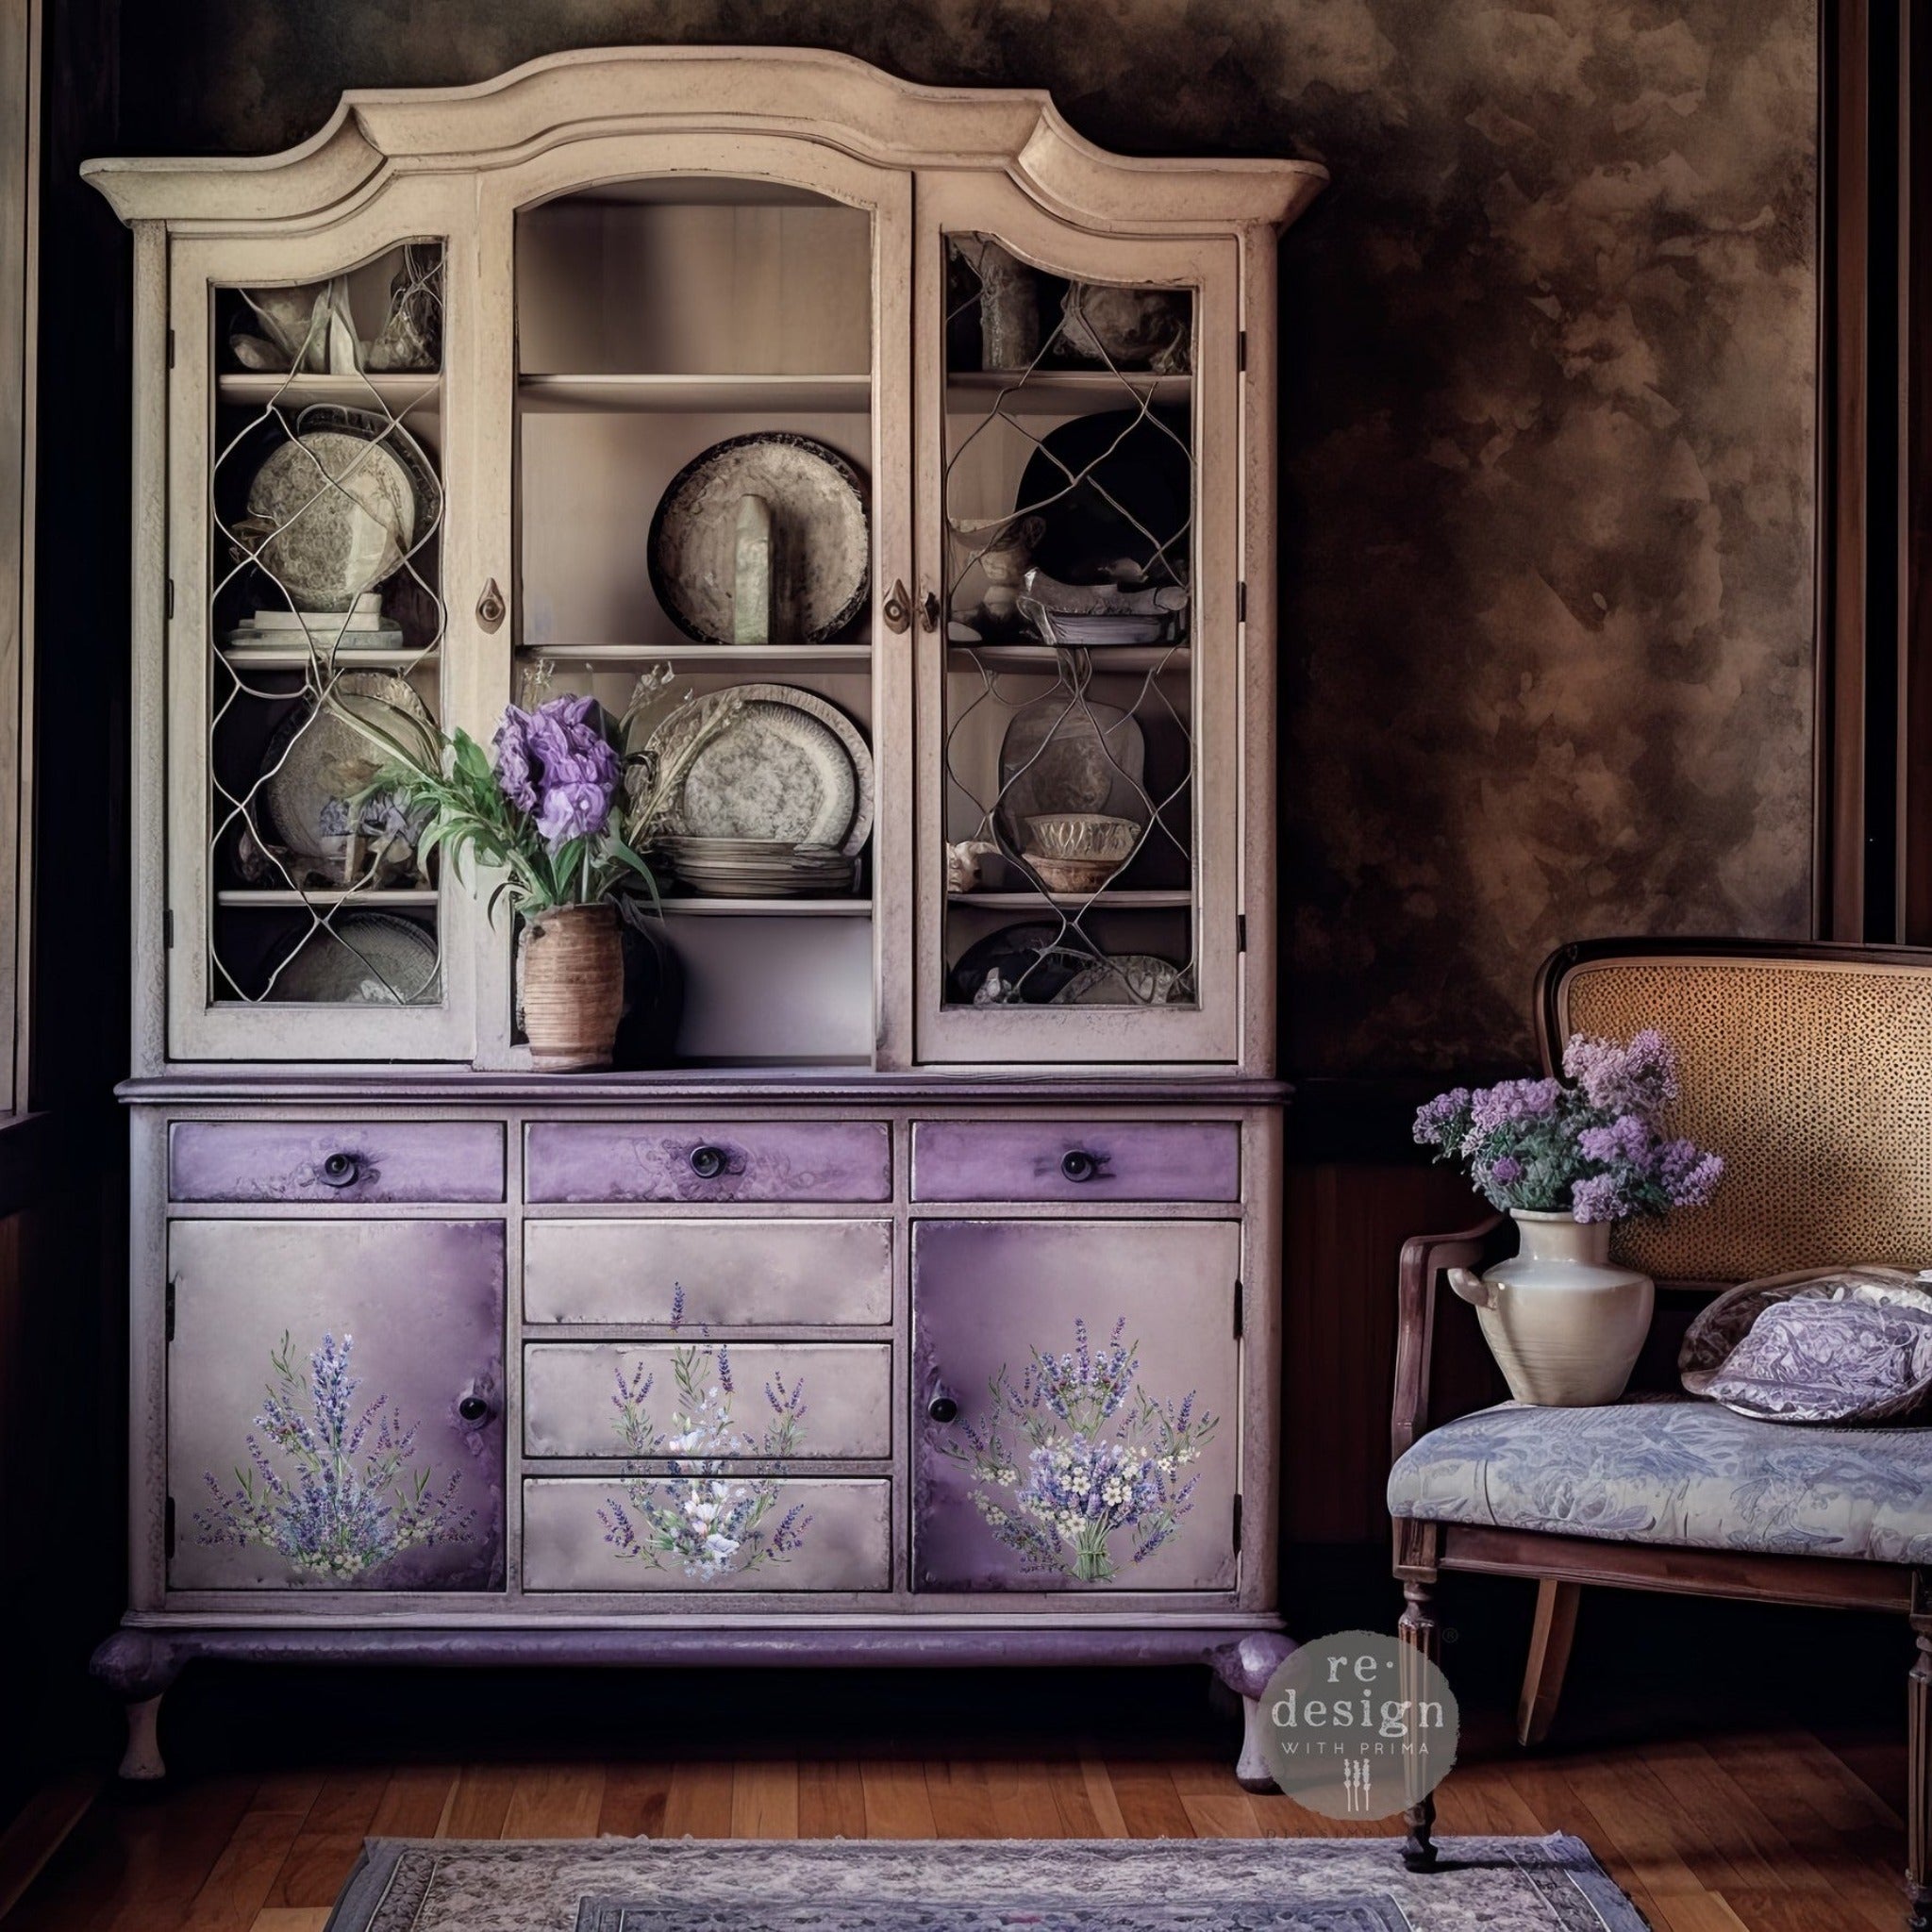 A vintage hutch is painted light beige on the top half and a blend of light and dark lavender on the bottom. ReDesign with Prima's Lavender Bunch small transfer is featured on the bottom doors and drawers.